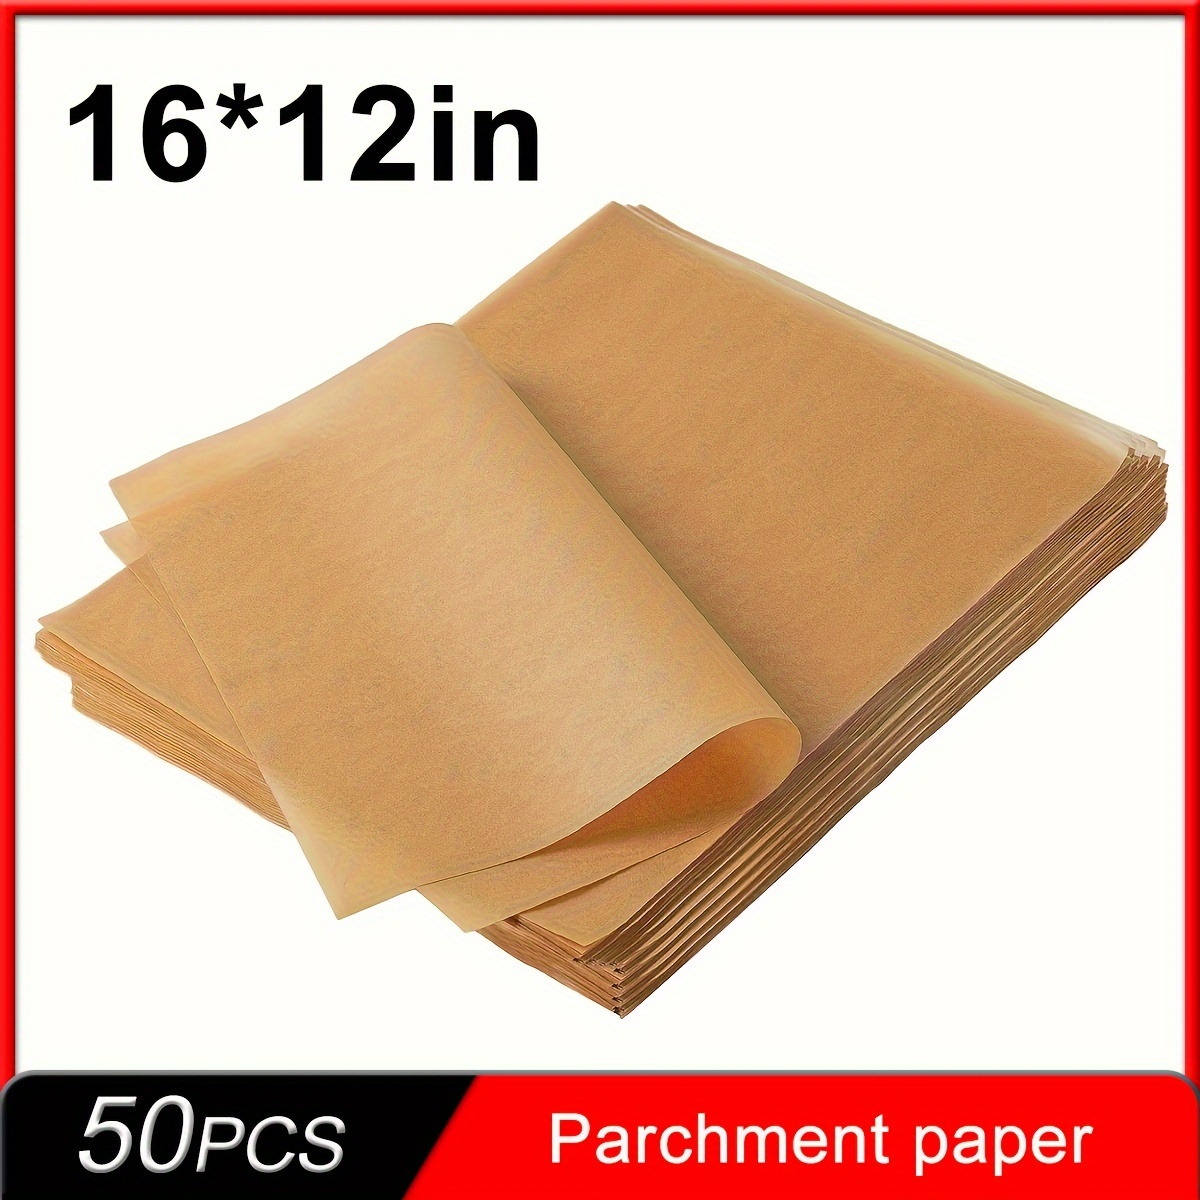 

50pcs, 12x16 Inch Parchment Paper, Heavy Duty Baking Paper, Unbleached Non-stick Sheets For Air Fryer, Grilling, Steaming Cooking Bread Cake And Wrapping Foods